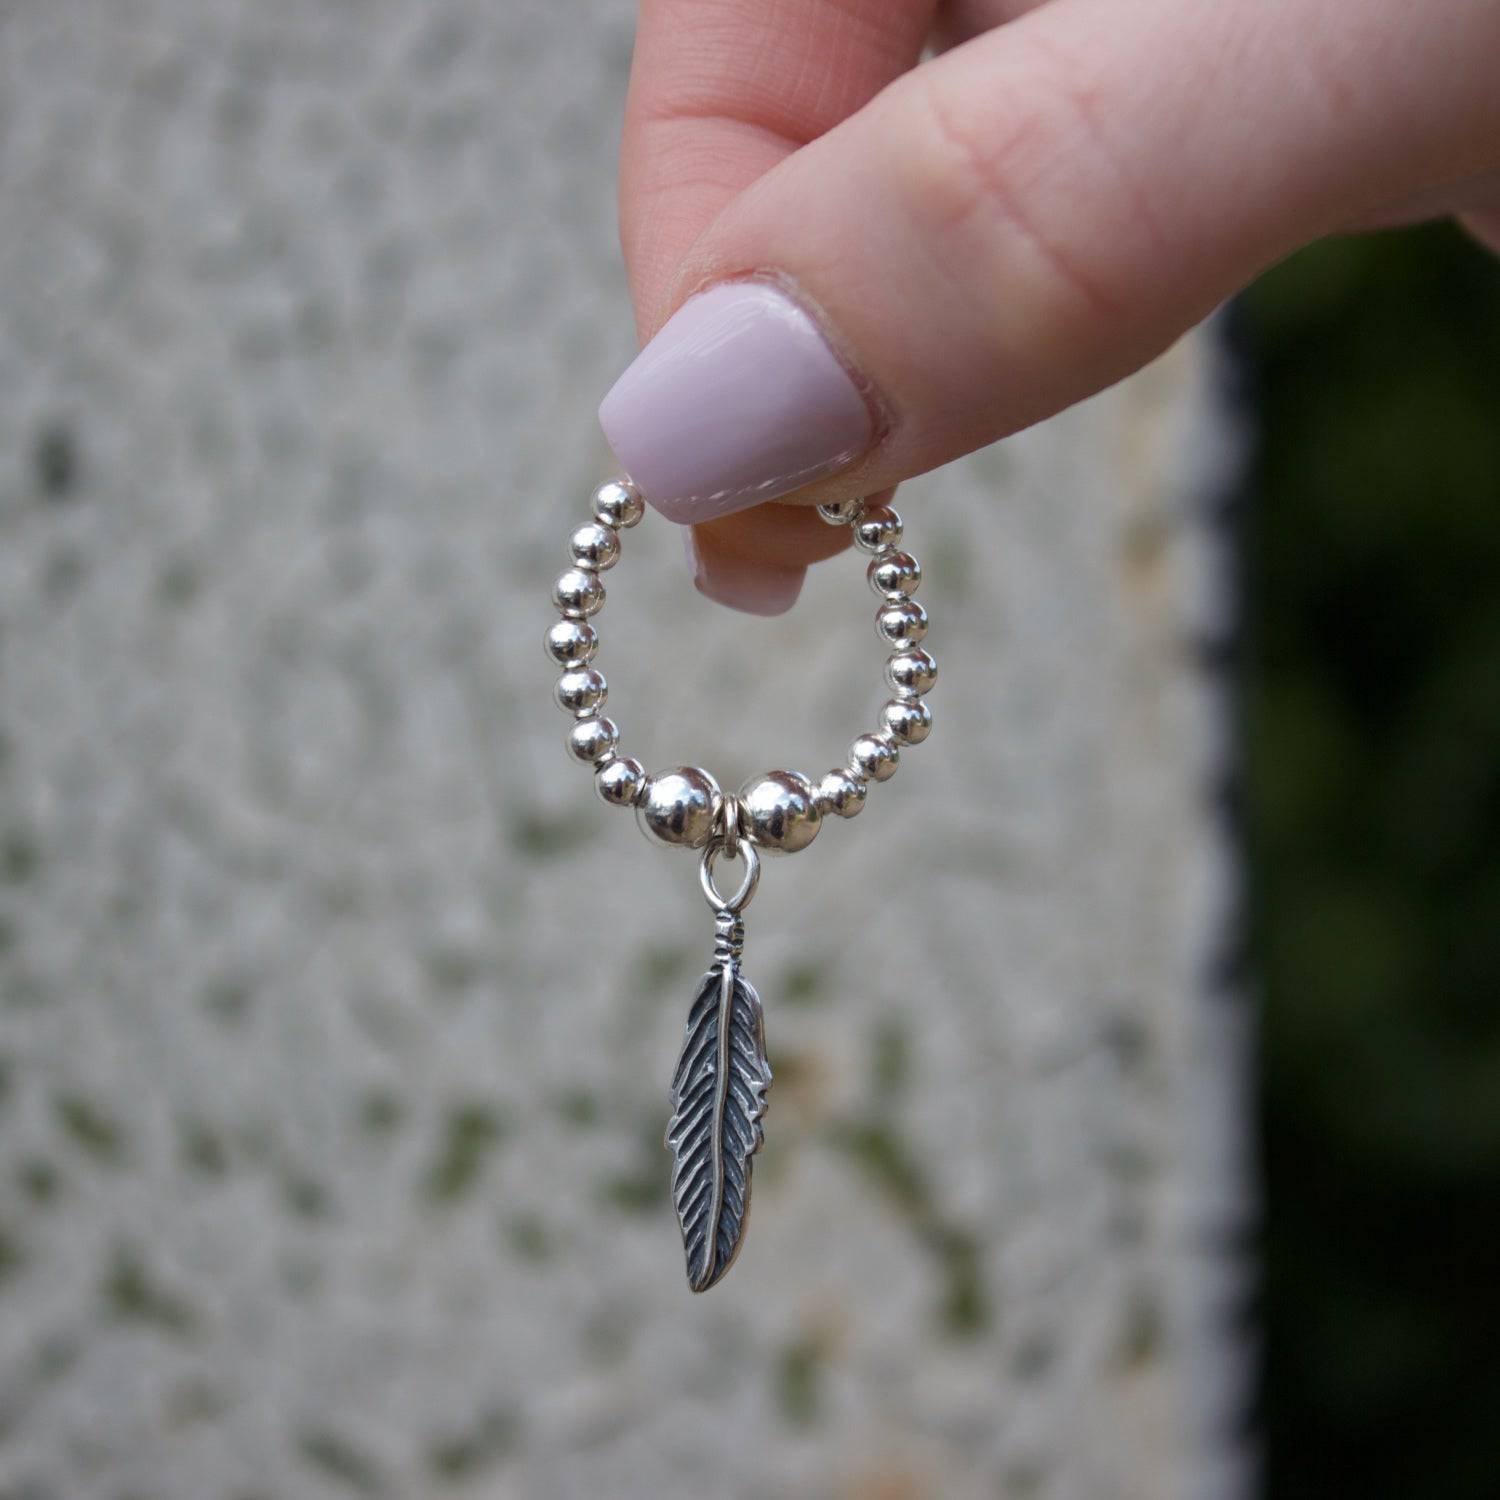 Feather on Silver Ball Bead Ring - MYLEE London